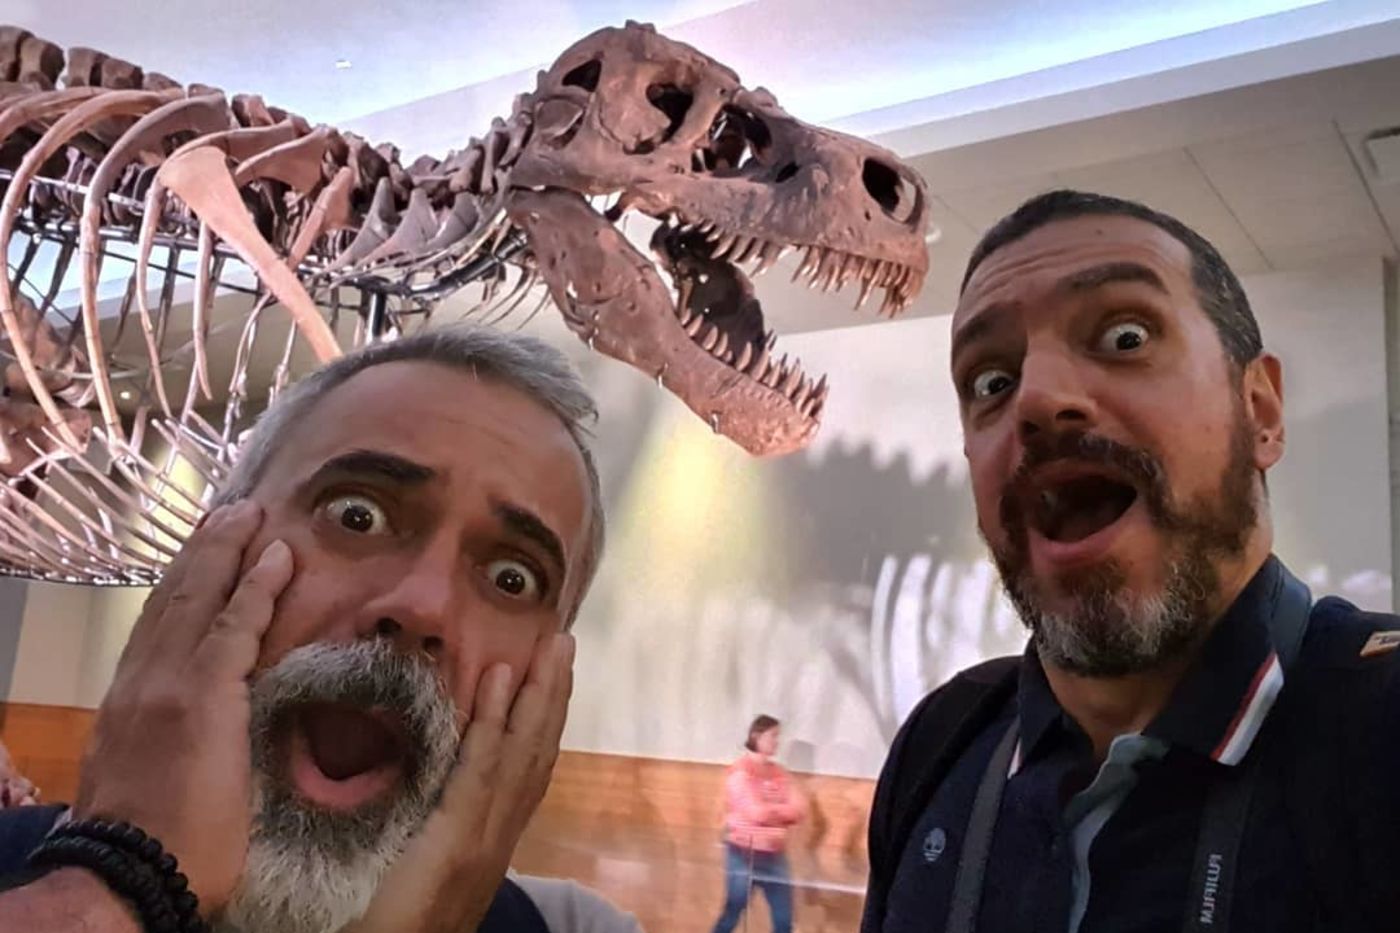 Media for Visiting SUE the T. rex: What to Know Before You Go